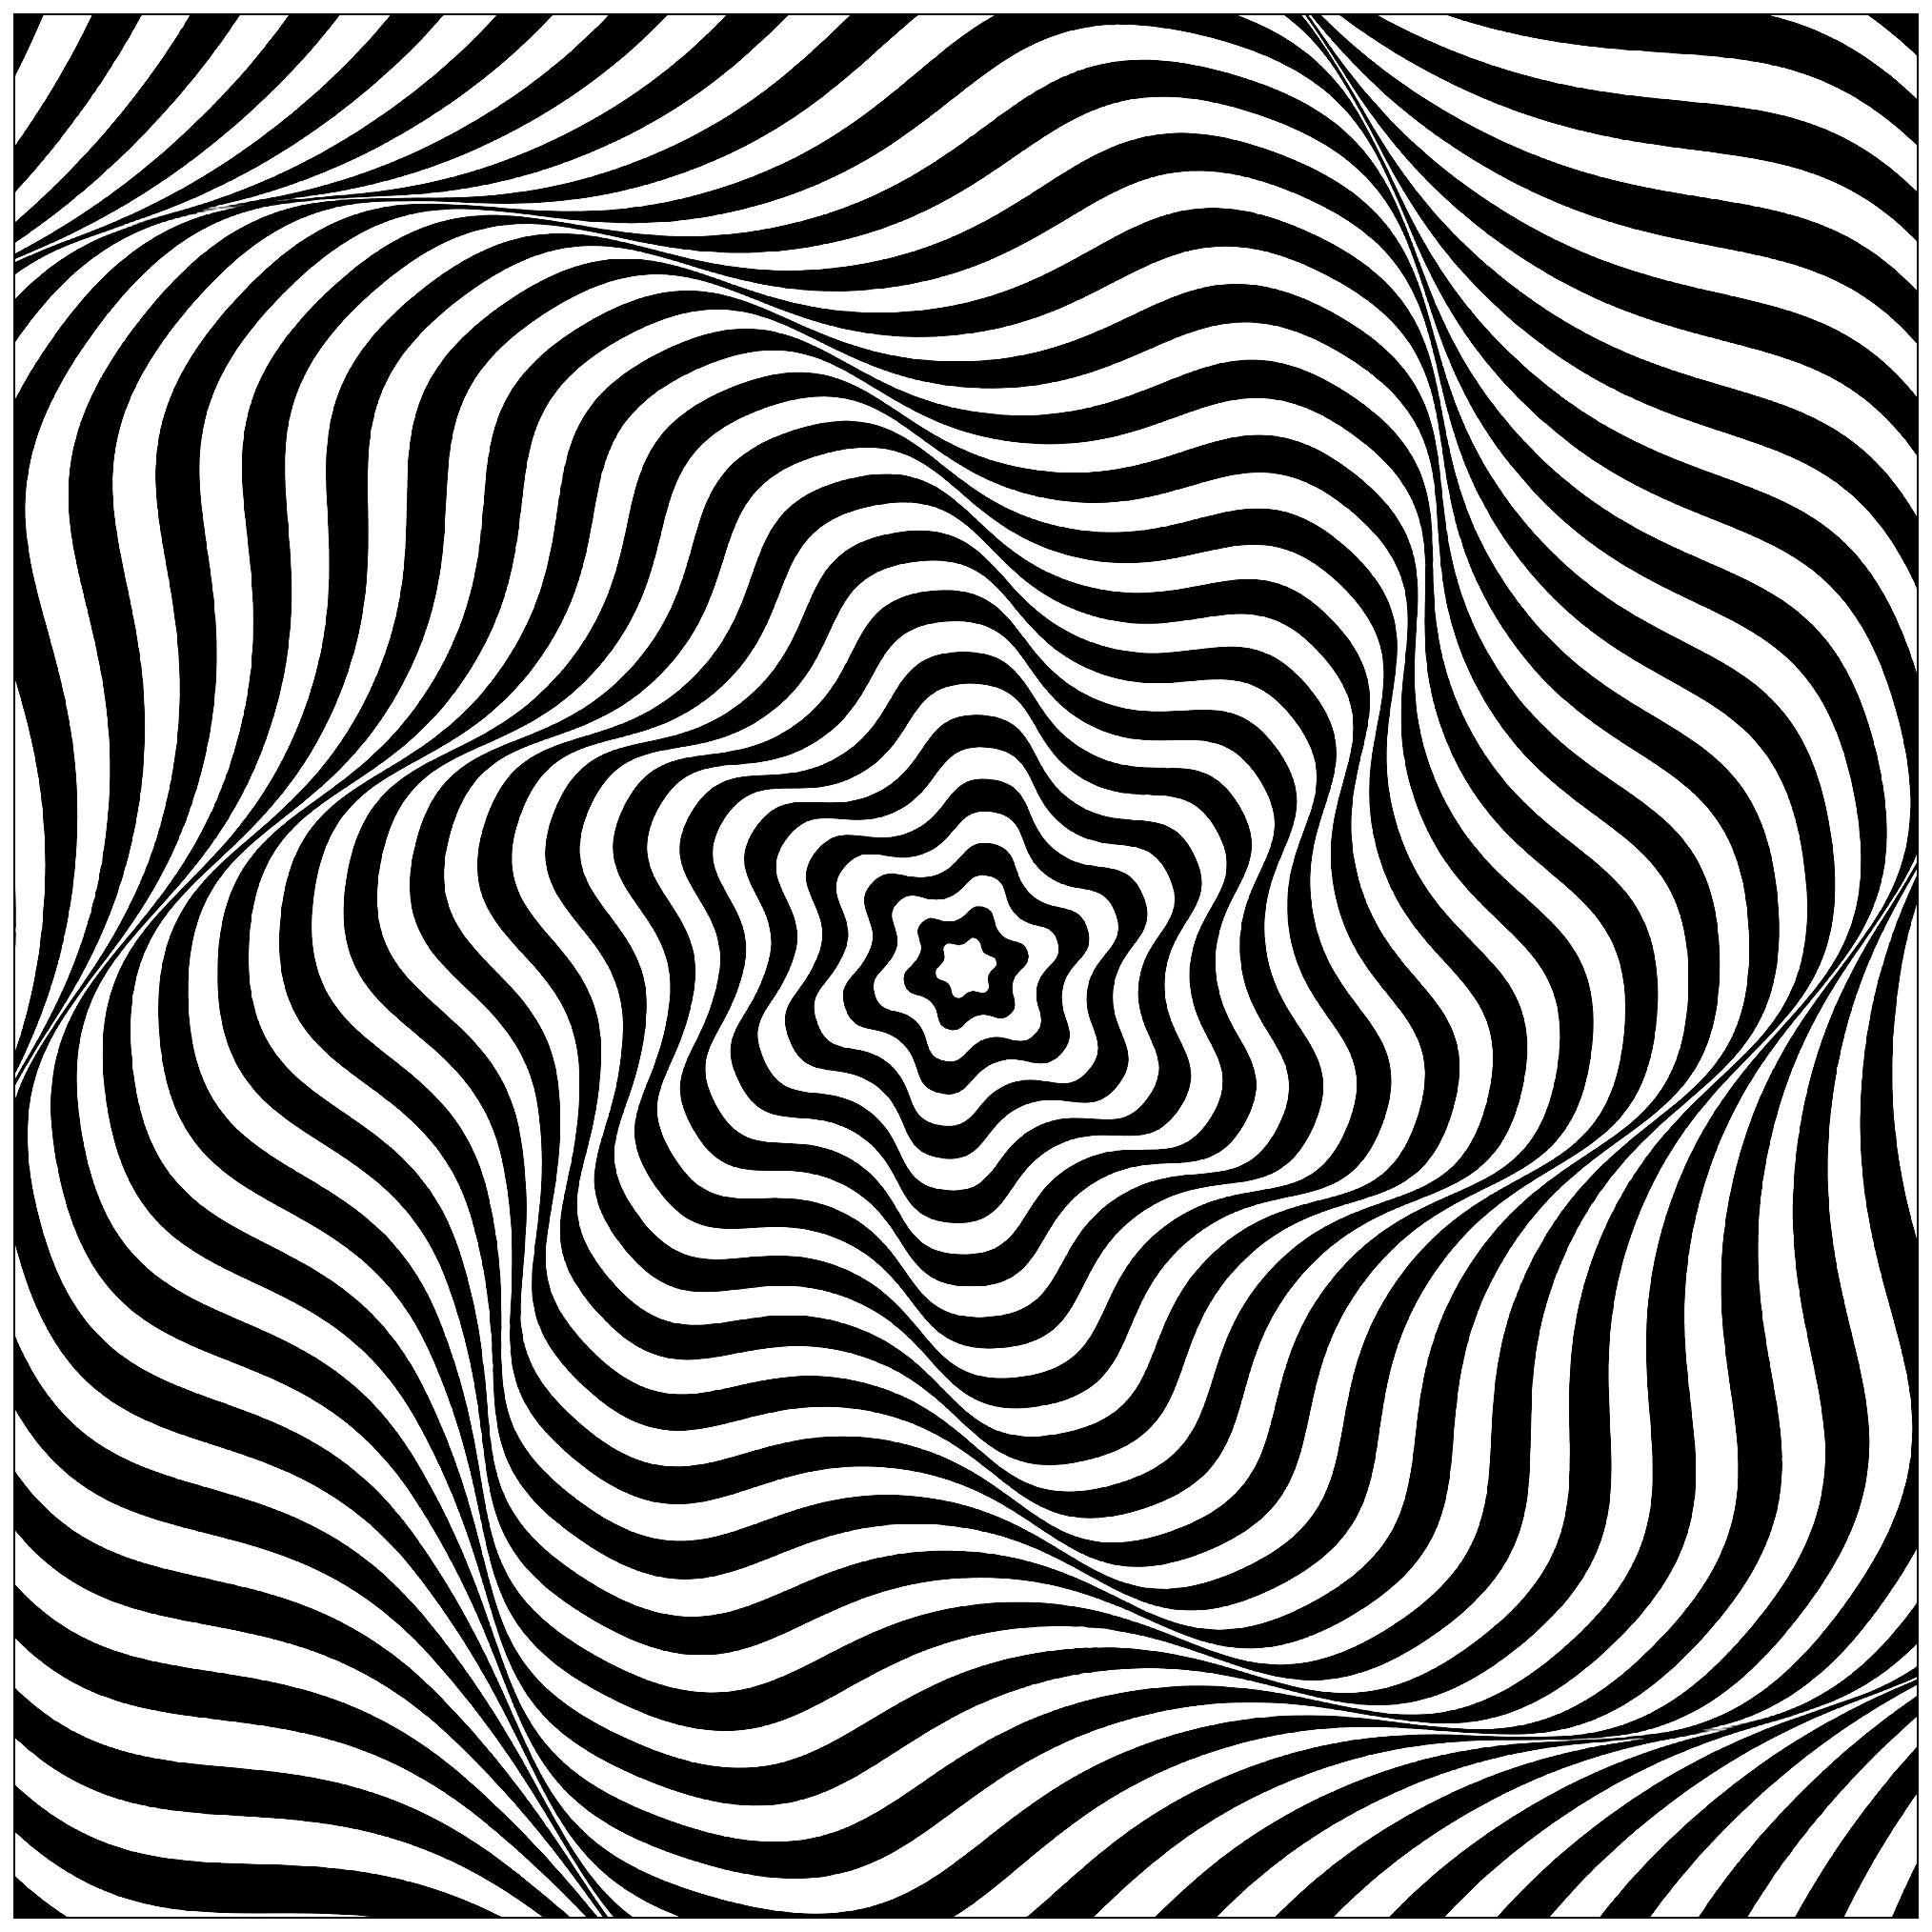 Op art wavy rotary movement - Optical Illusions (Op Art) Adult Coloring ...